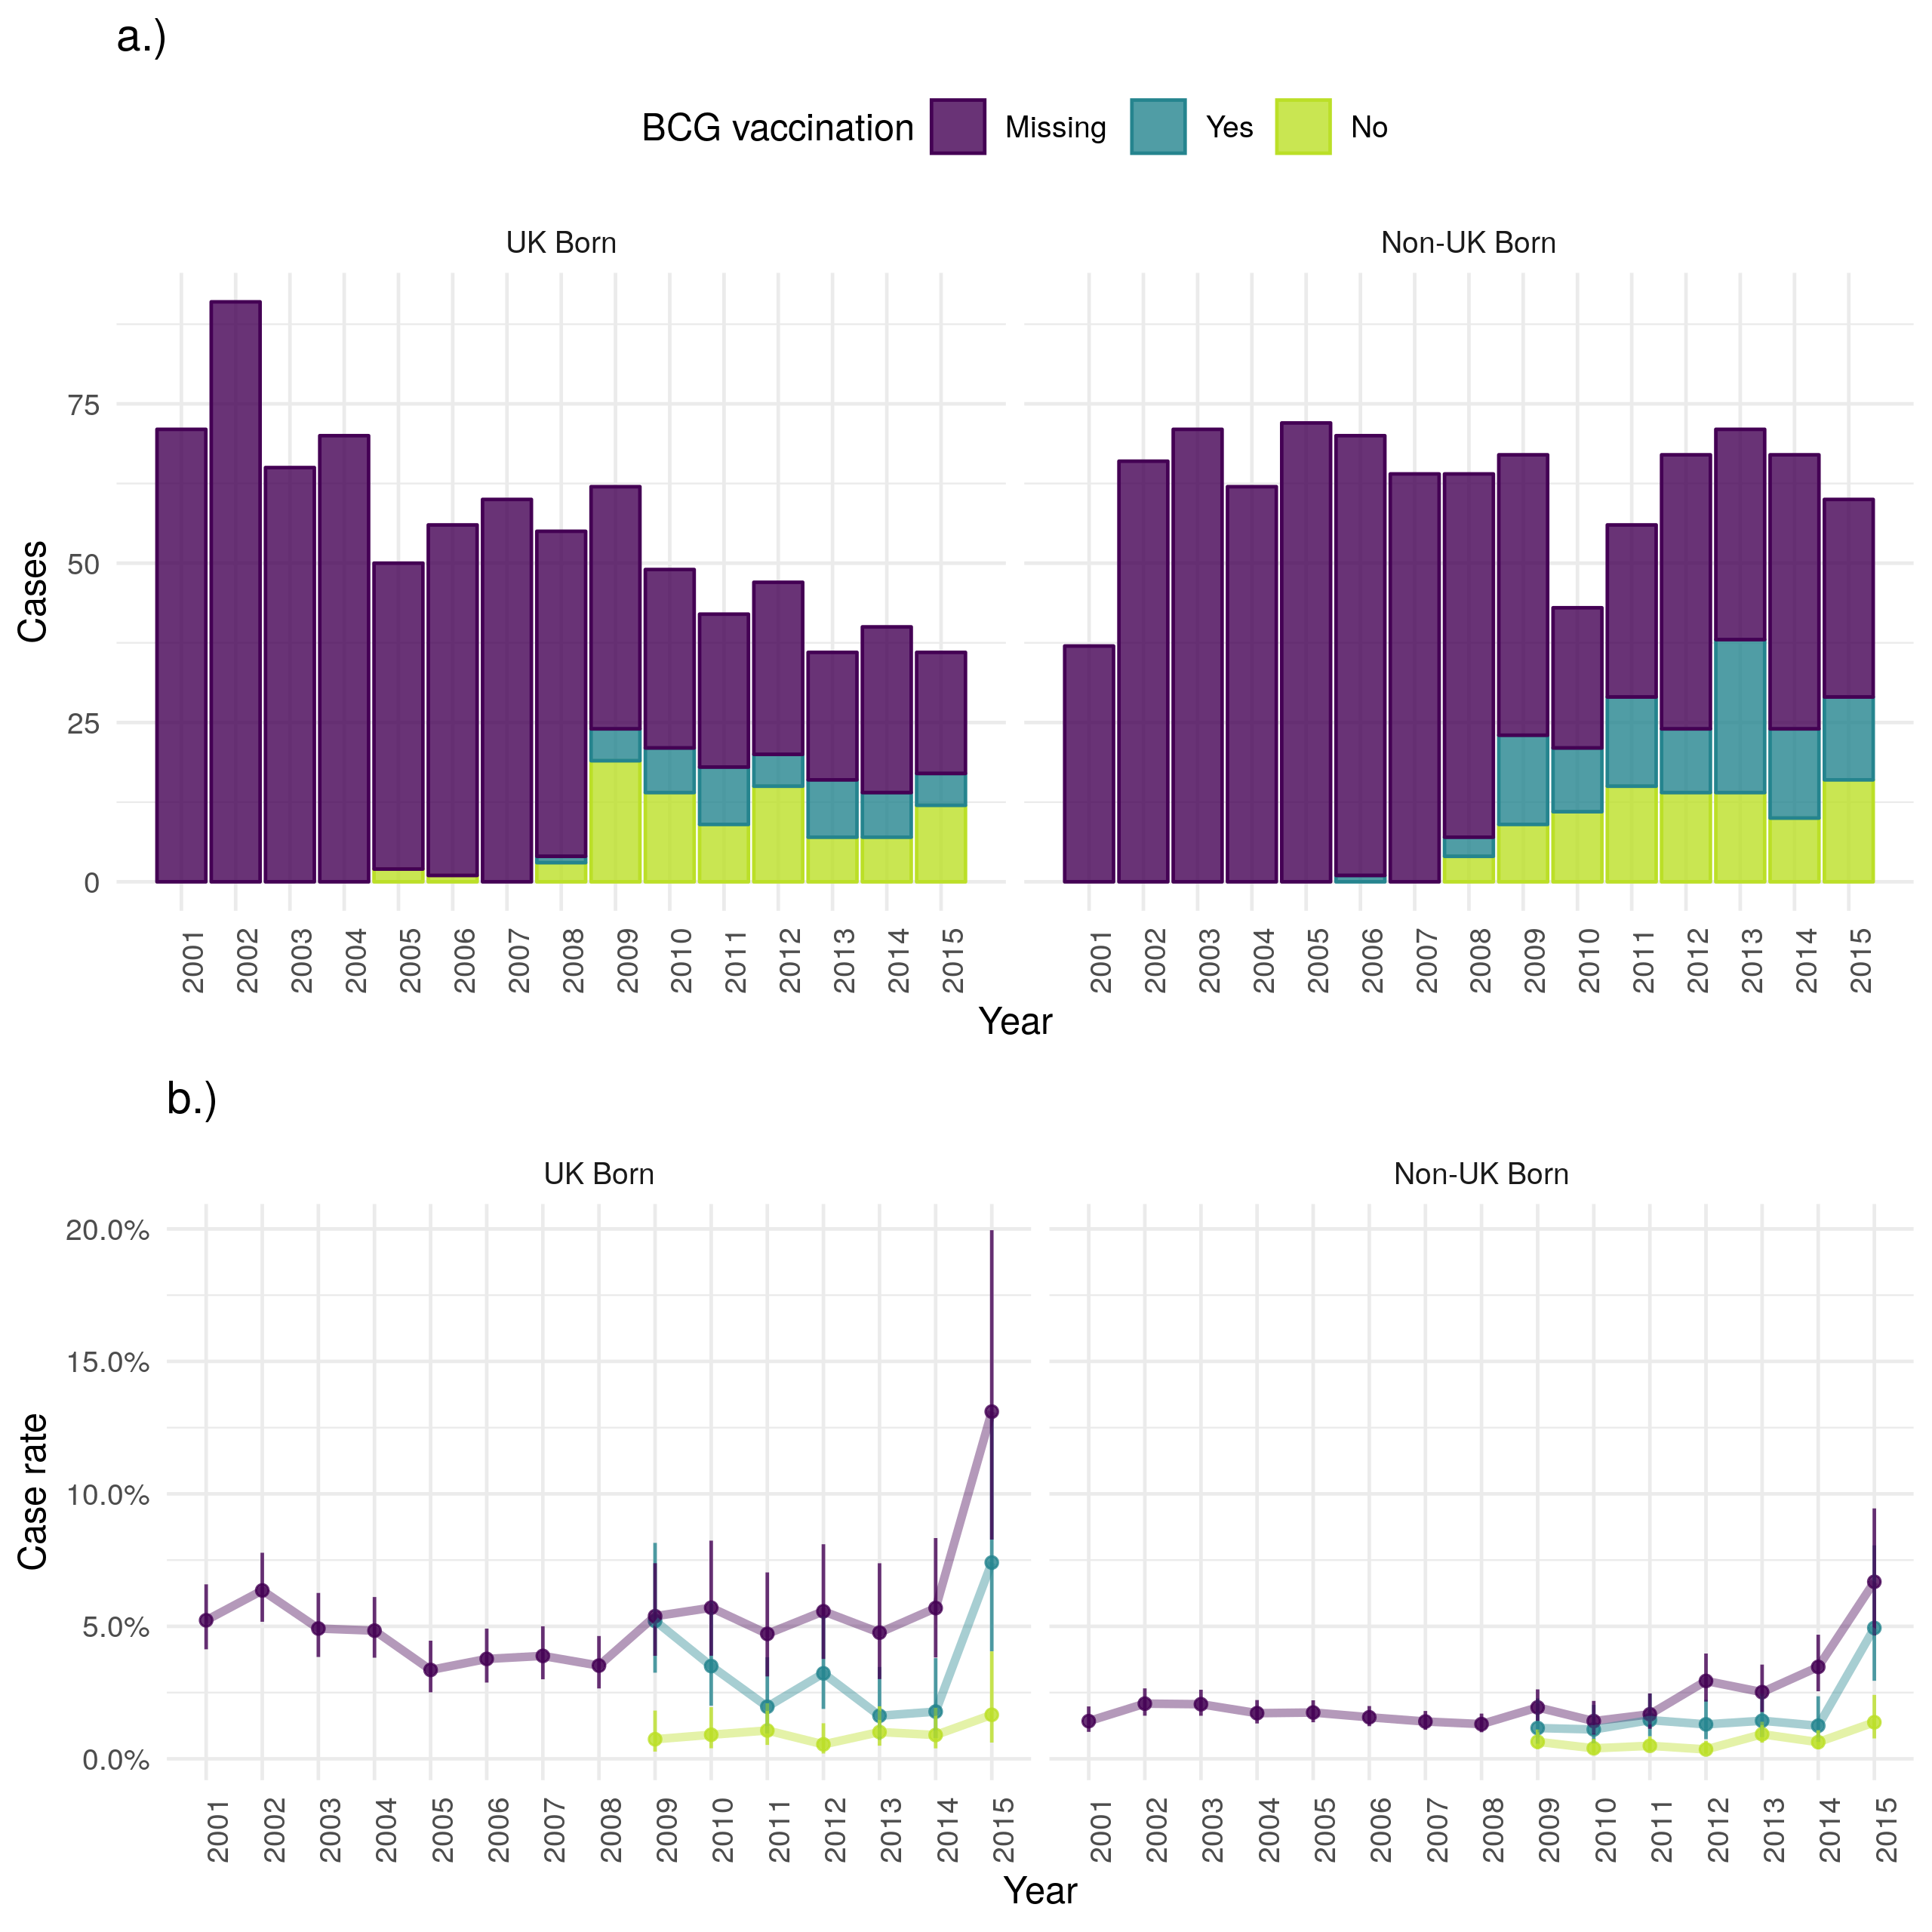 a.) Cases that died from TB by year of notification stratified by UK birth and BCG status, b.) Case TB fatality rate stratified by UK birth and BCG status. Point estimates along with 95\% confidence are shown for all estimates. TB mortality has reduced over time in the UK born but remained stable in the non-UK born. This is also reflected in the case fatality rate with the UK born having a higher rate regardless of BCG status. The recording of BCG status has improved over time but it appears that for years with data BCG unvaccinated cases have a higher TB case fatality rate in both the UK and non-UK born. In both populations those missing UK birth status are more likely to die from TB. Data is incomplete for 2015, with cases that survived being potentially more likely to be missing than those that died. This may be the cause of the observed increase in uncertainty and may also have resulted in a biased TB fatality rate for 2015.